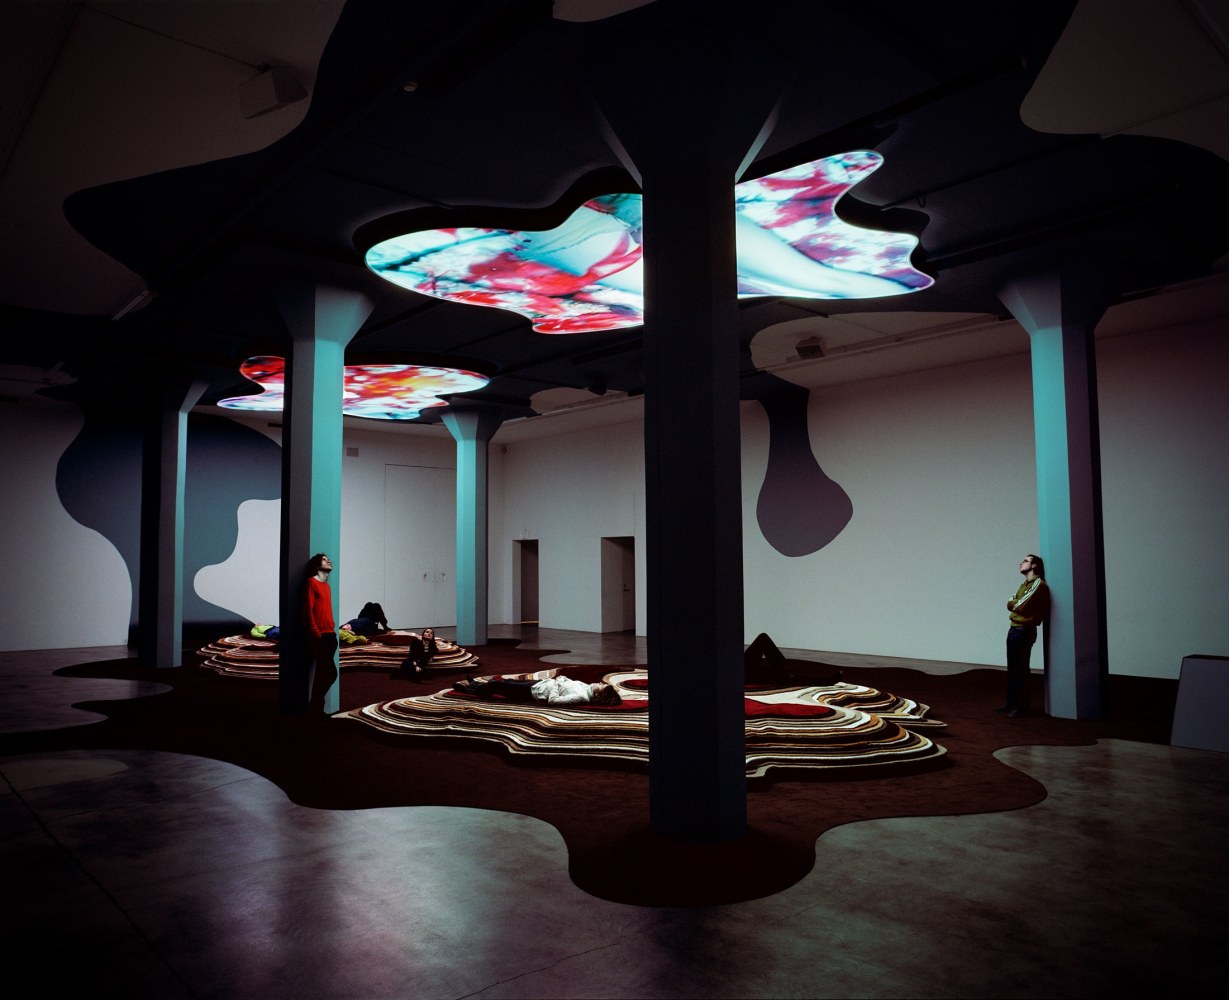 Pipilotti Rist
Tyngdkraft, var min v&amp;auml;n, (Gravity Be My Friend), 2007
Two-channel video and sound installation, color, with two amorphous screens and two carpet sculptures
Duration: 12 minutes
Dimensions adaptable
Installation view, Magasin III, Stockholm, 2007
Photo: Johan Warden